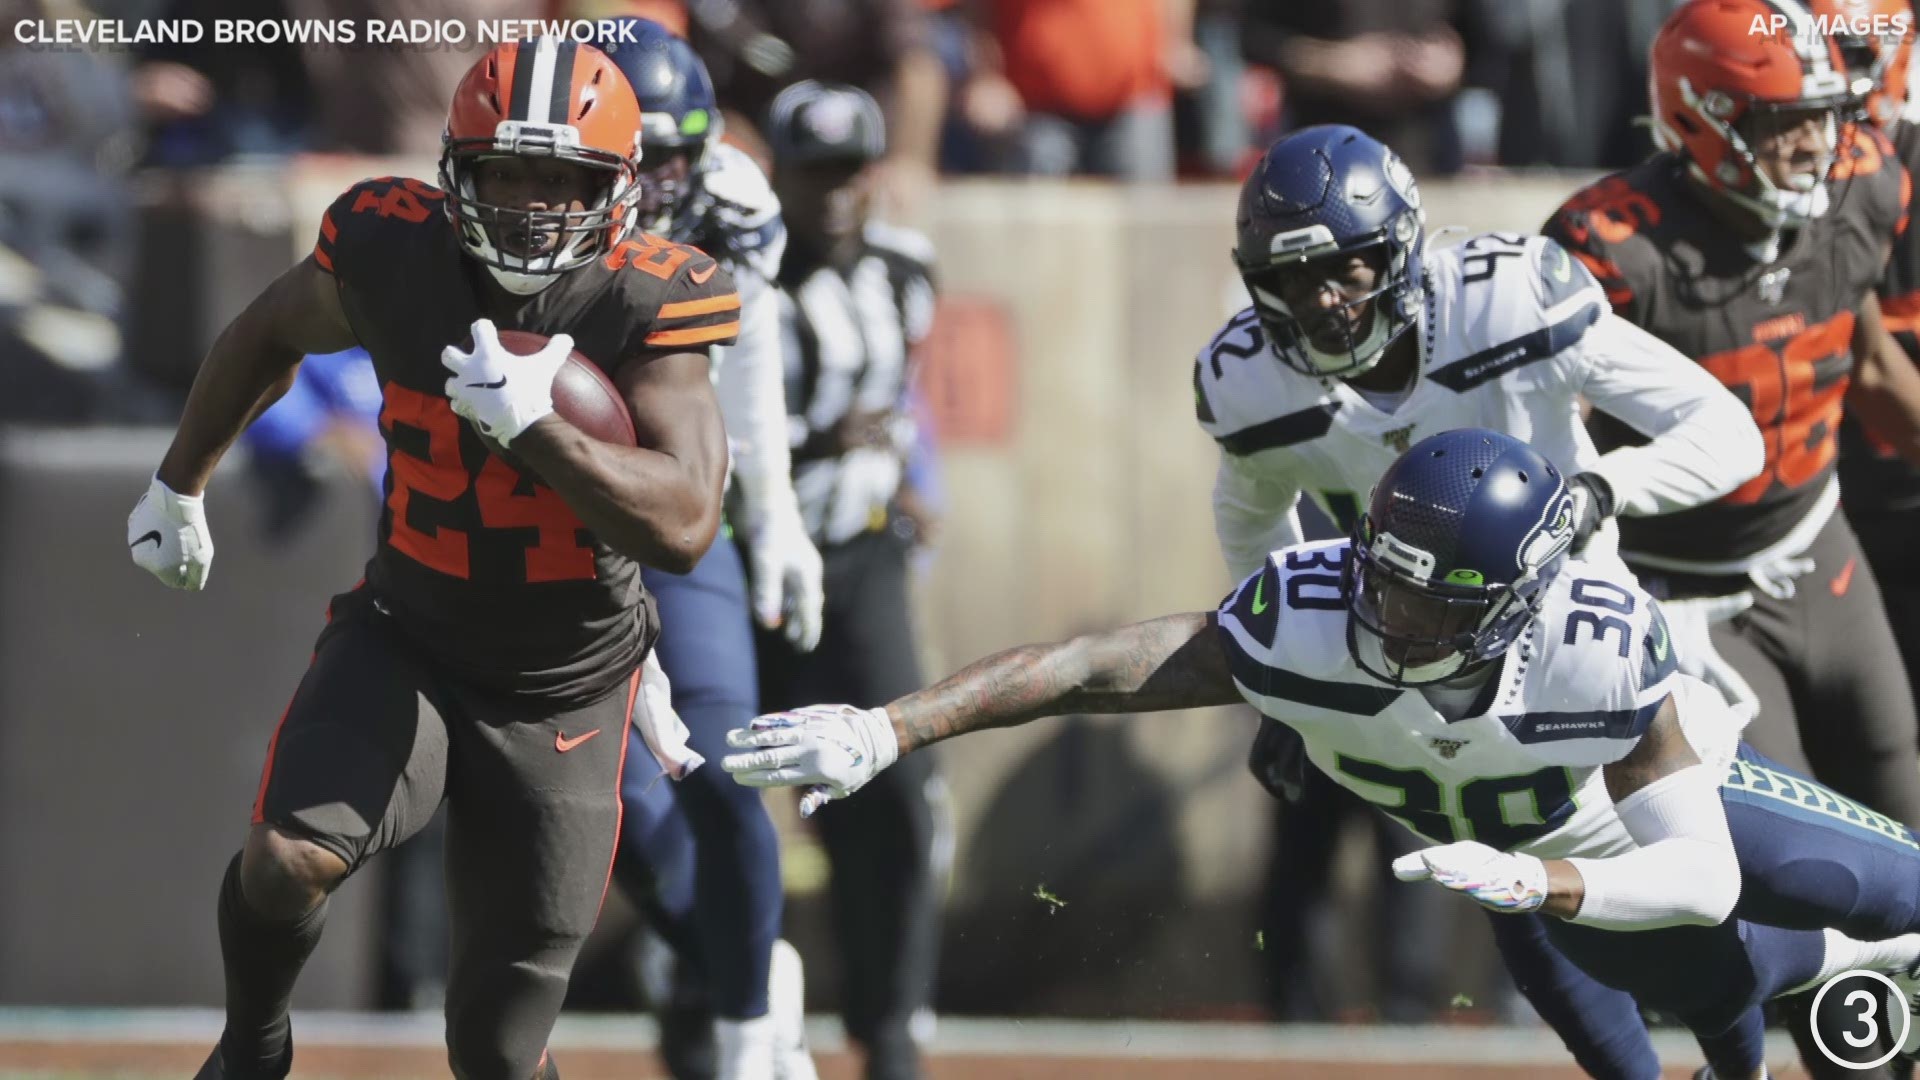 Nick Chubb broke free for a 52-yard gain to set up the Cleveland Browns' third touchdown of the game against the Seattle Seahawks.